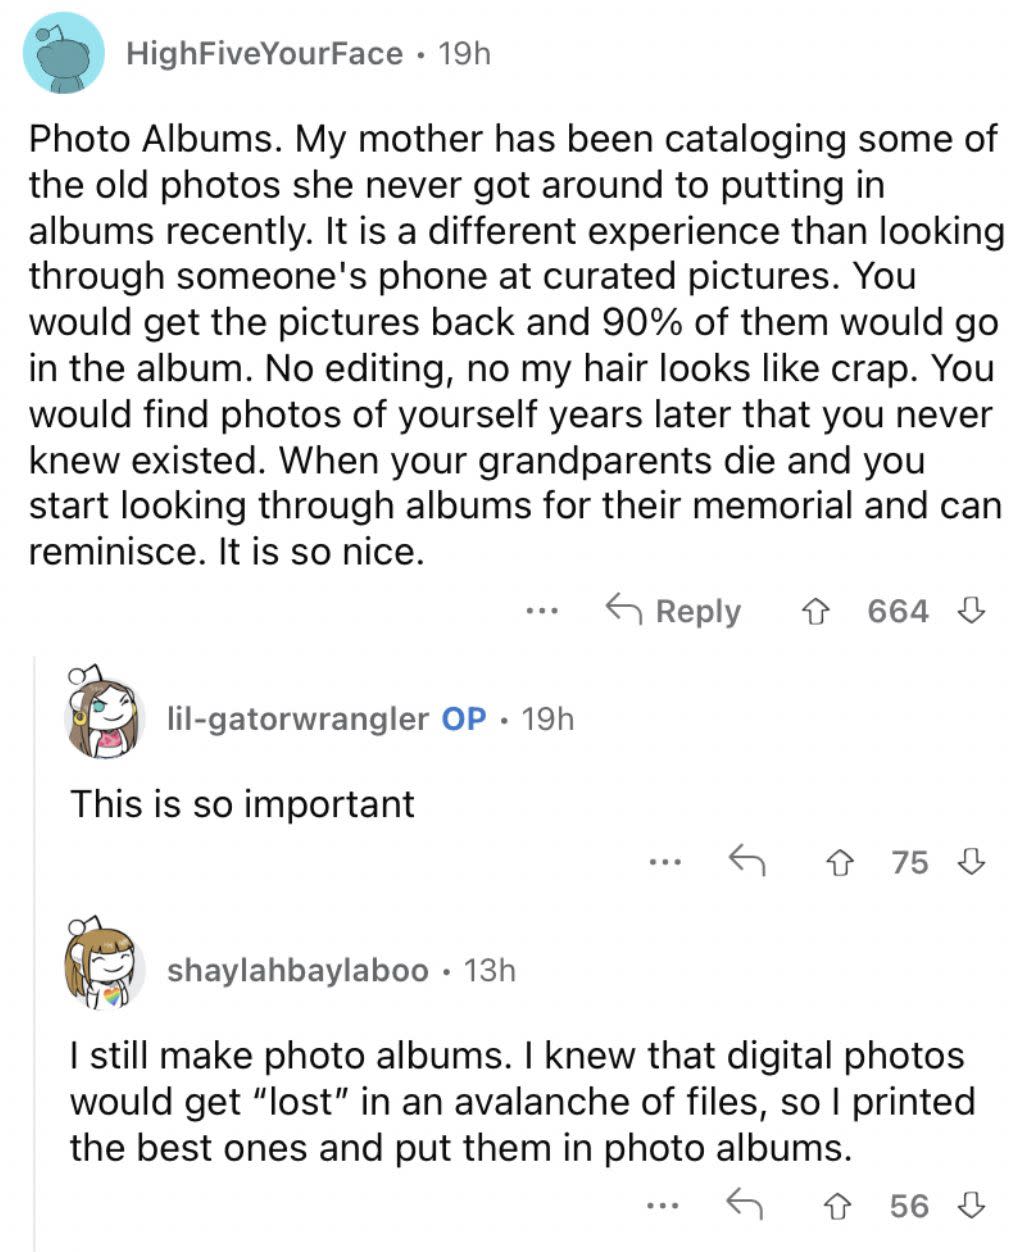 Reddit screenshot about the value of putting together photo albums.